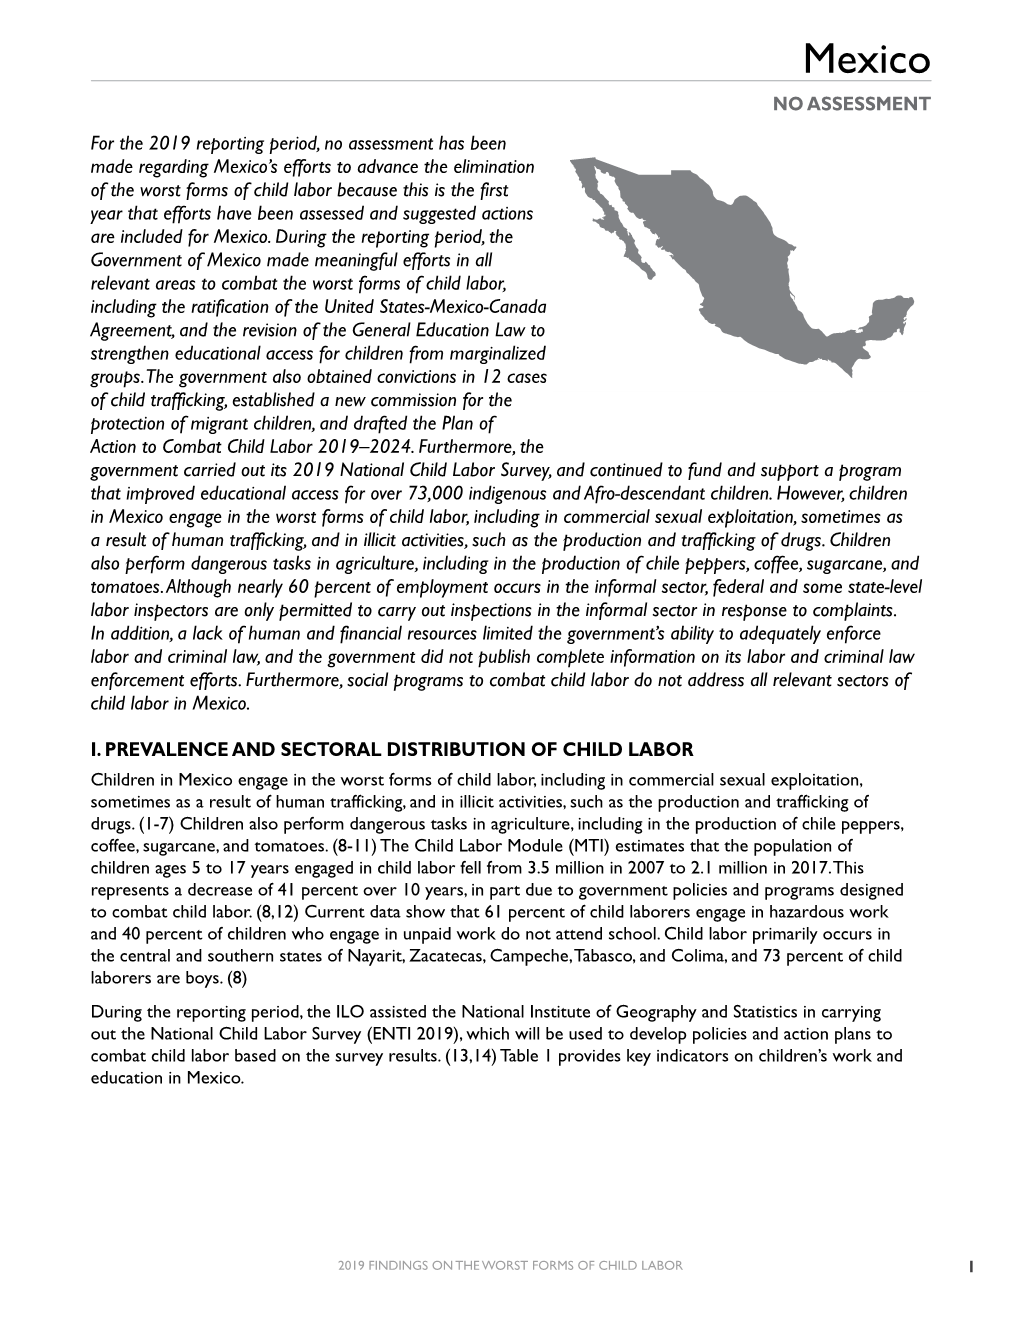 2019 Findings on the Worst Forms of Child Labor: Mexico